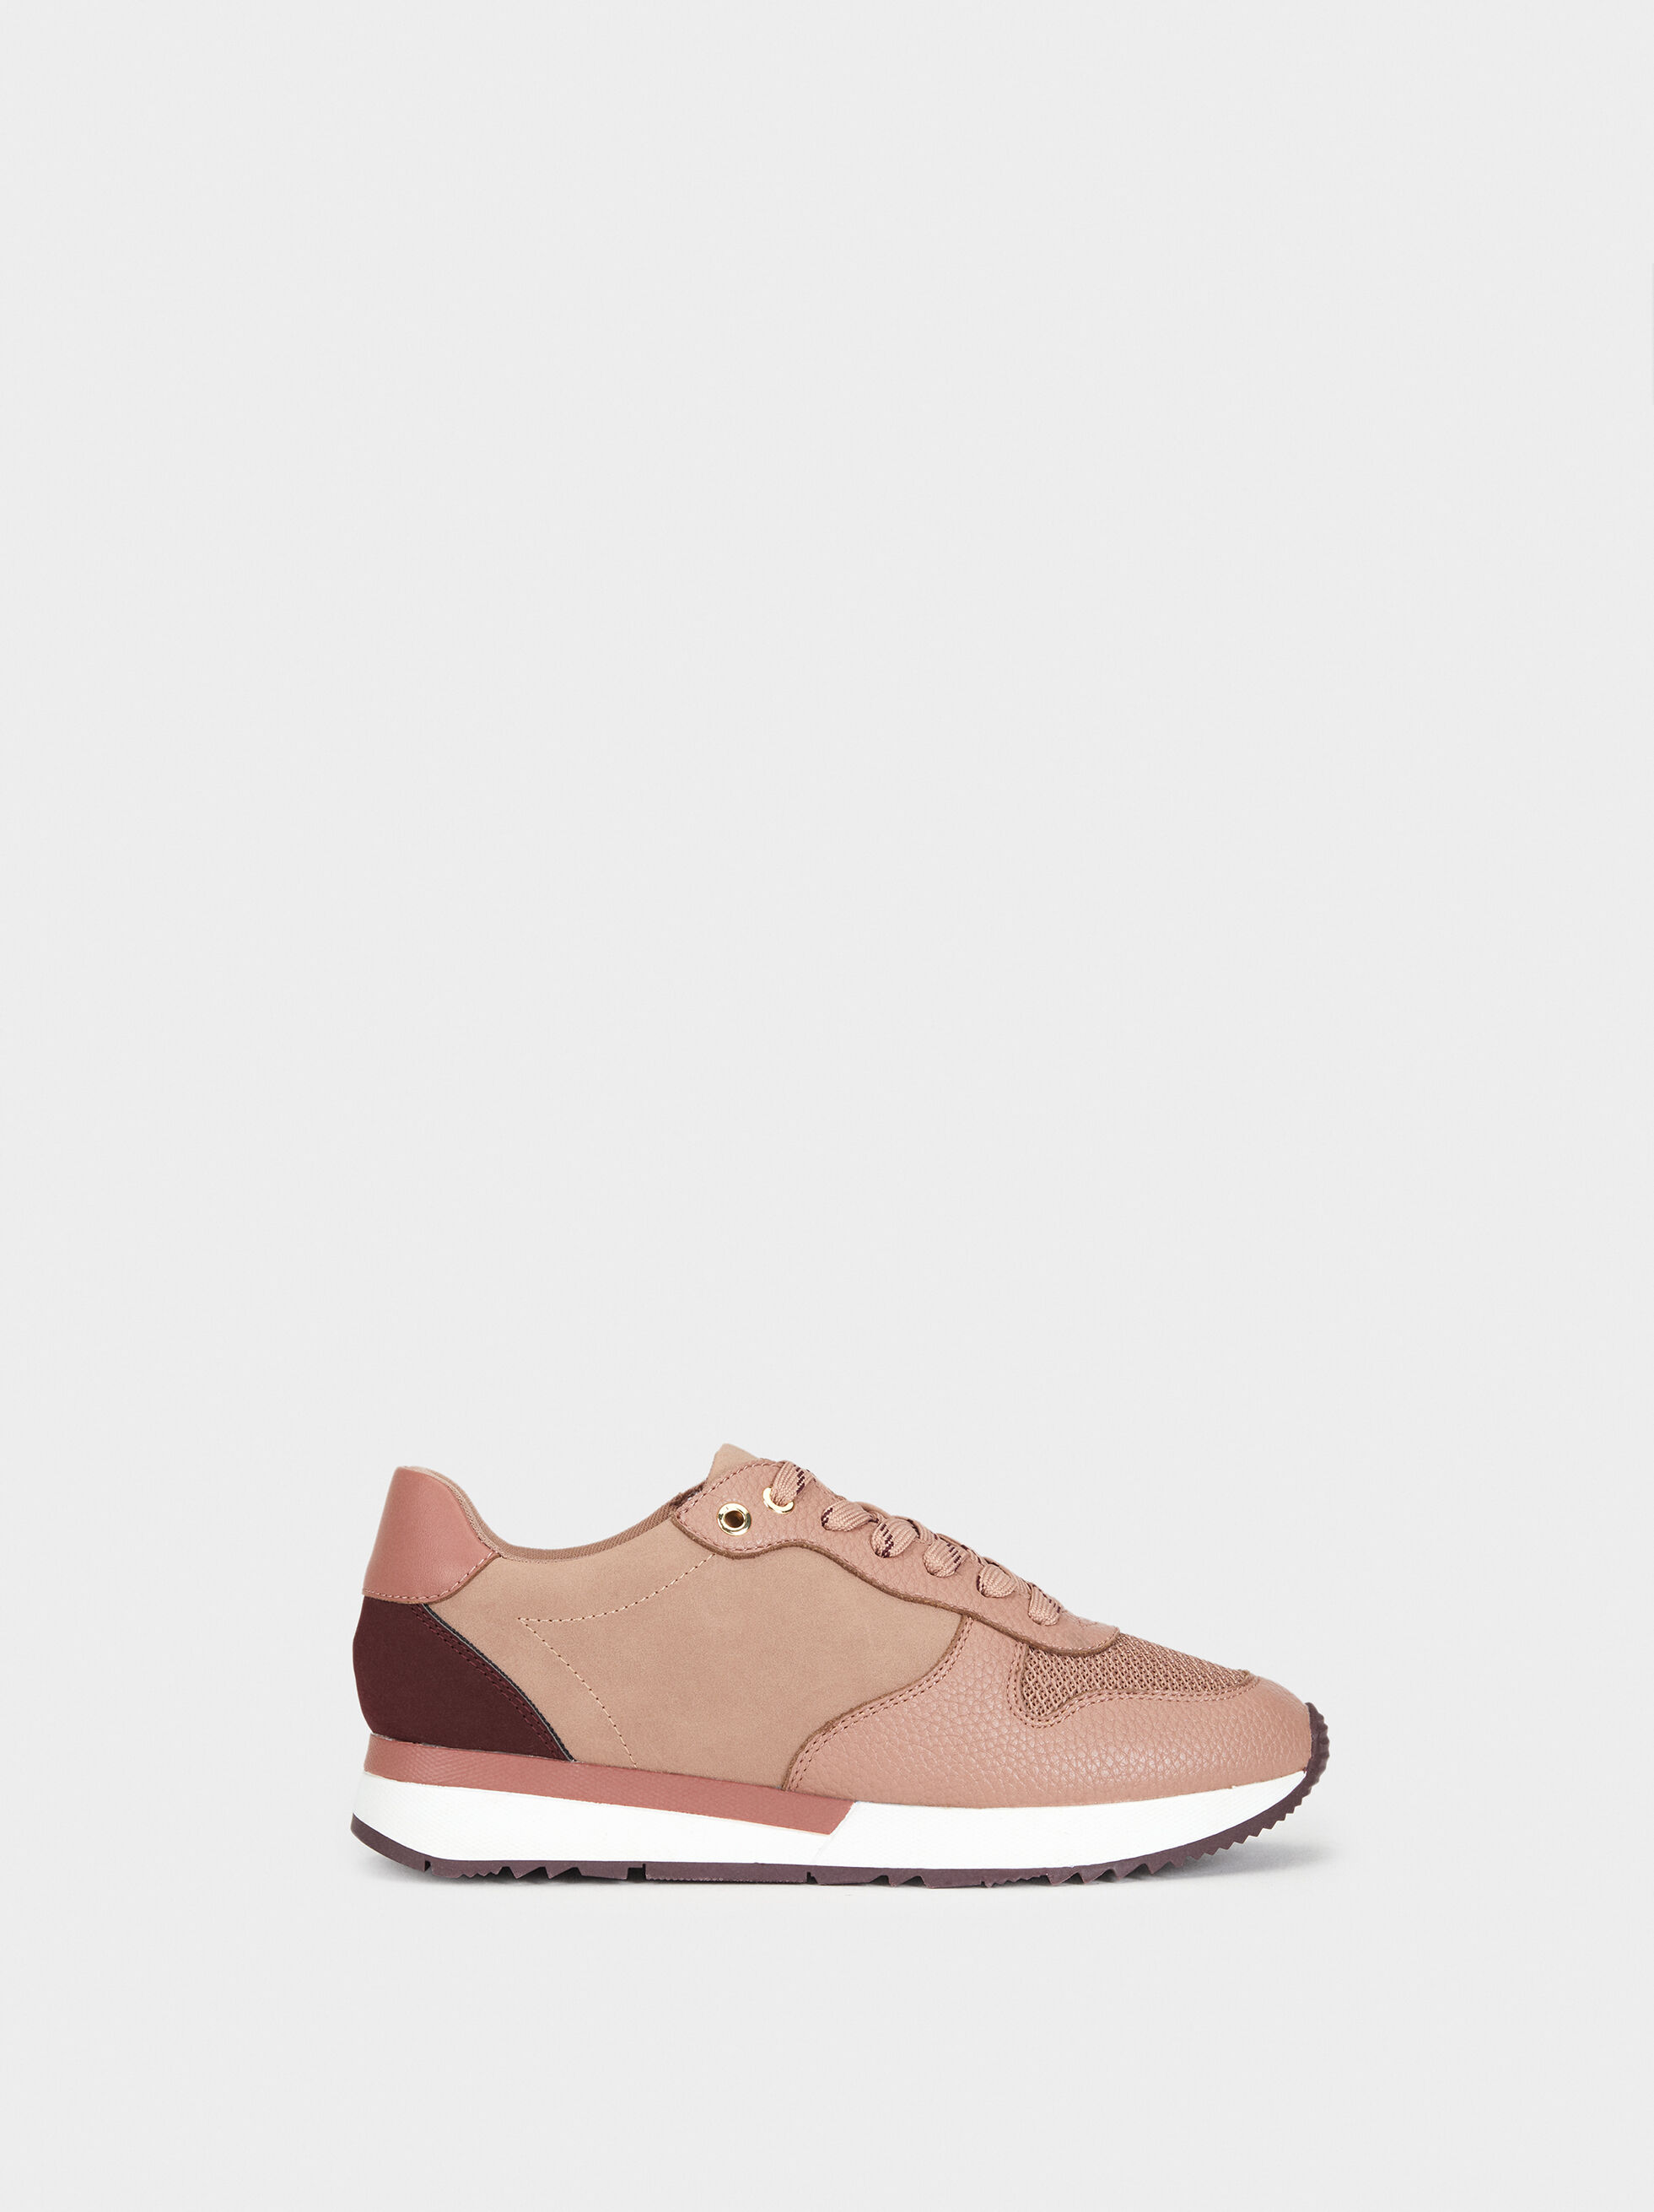 nude colour trainers